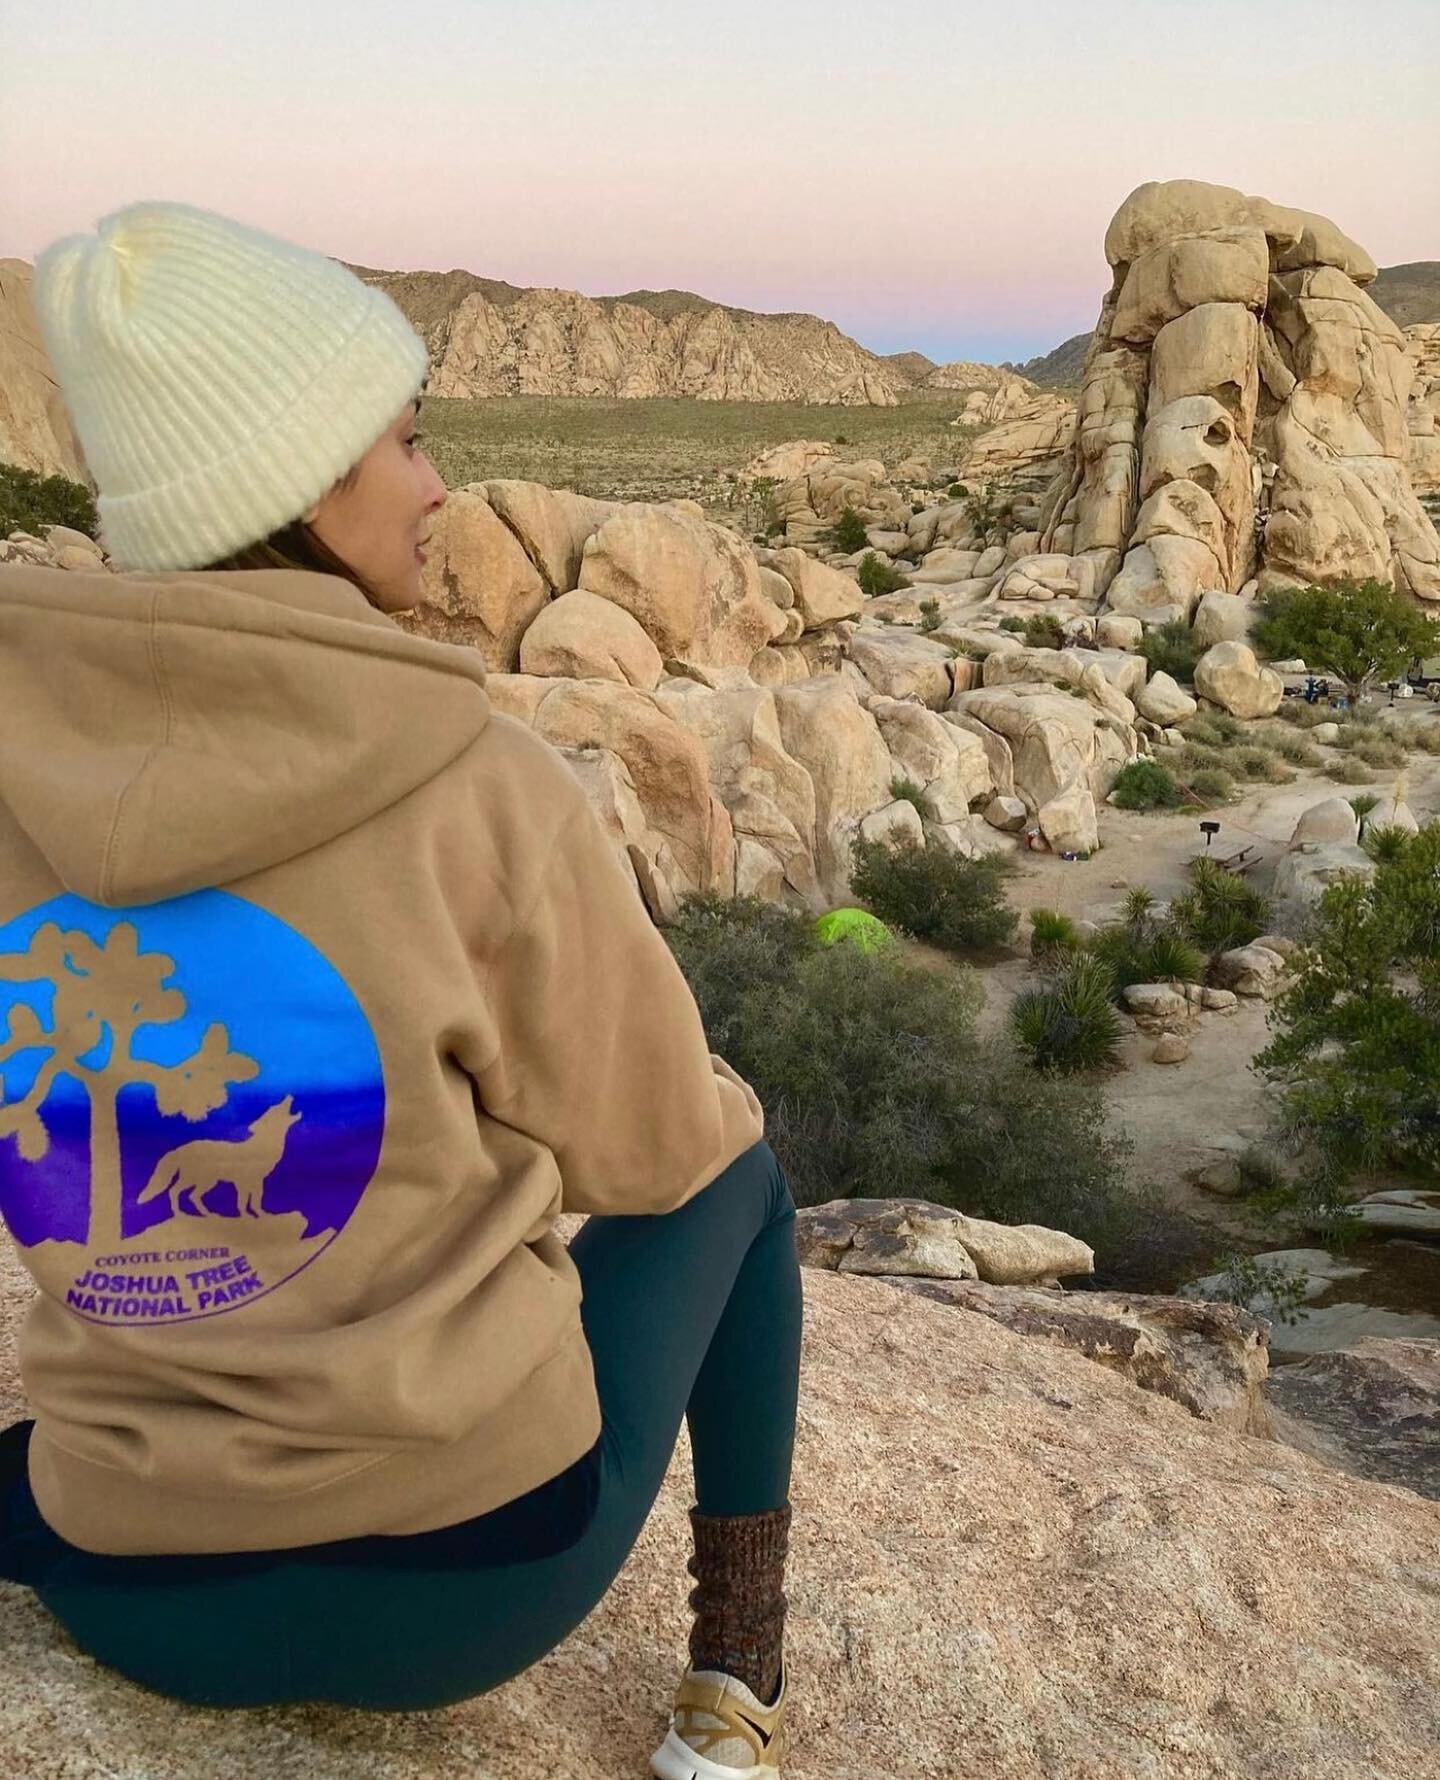 We love it when our customers create snazzy pretty photos we can steal. Thanks @vivalaariel  for the photo of our sweatshirt out in the wild. #joshuatree #desert #jtnp #joshuatreenationalpark #jt #coyotecorner #thejoshuatreestore #sweatshirts #welove